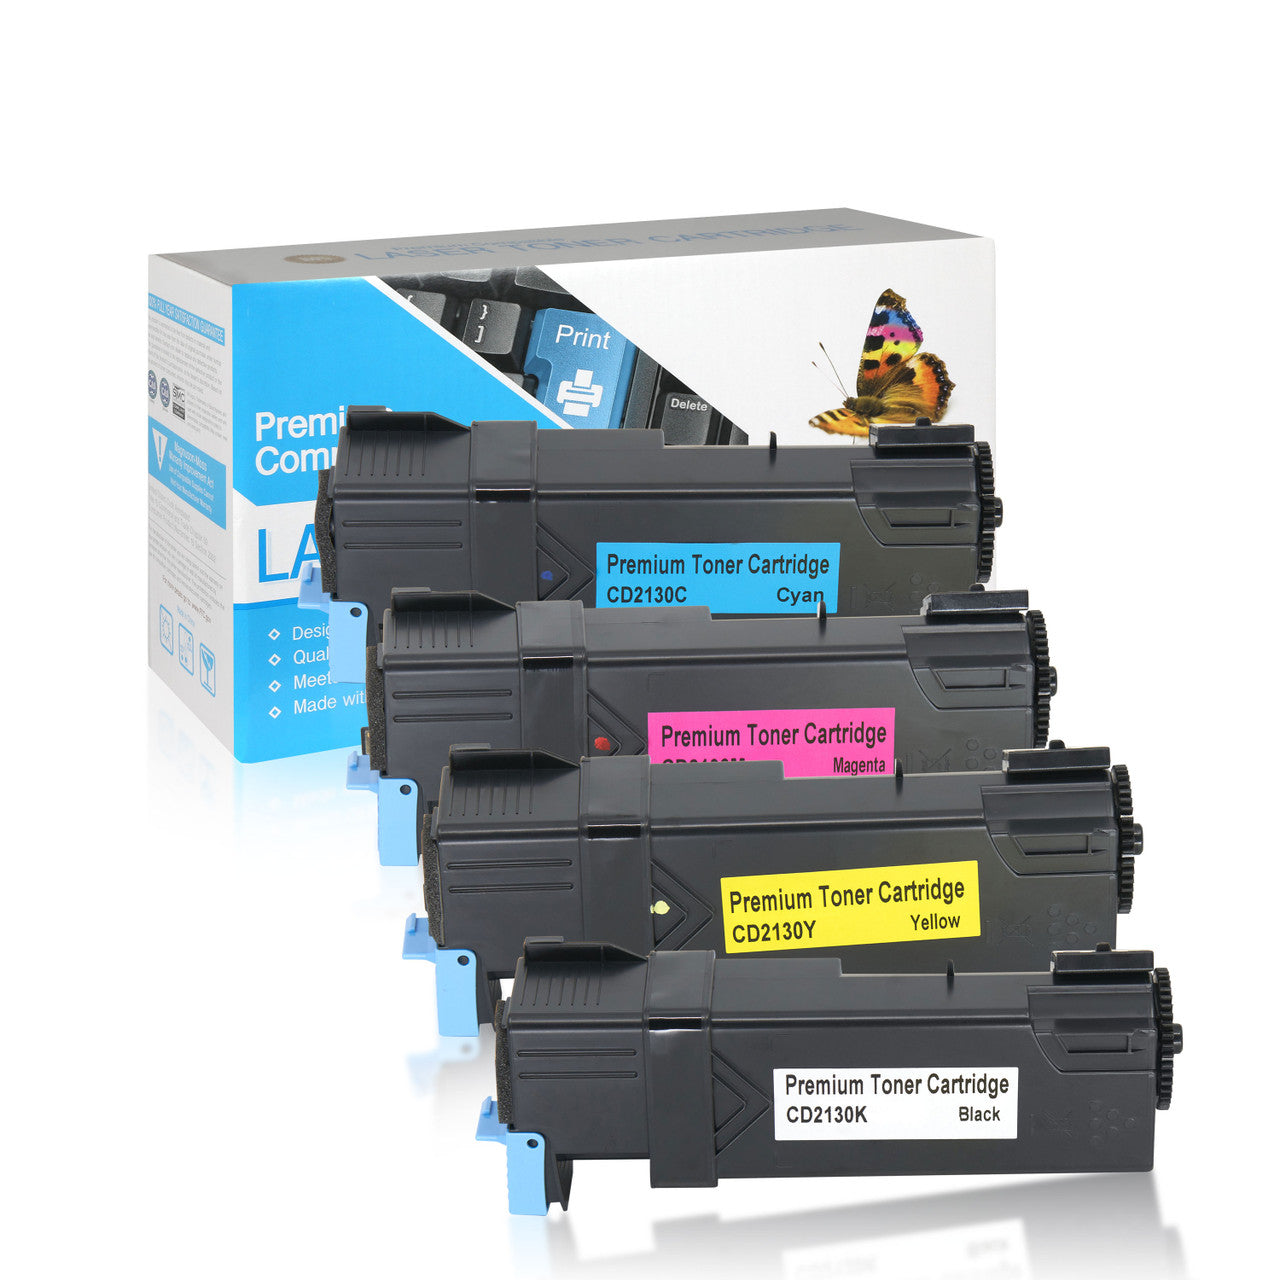 Compatible Dell 2130cn Toner Cartridge (All Colors) by SuppliesOutlet